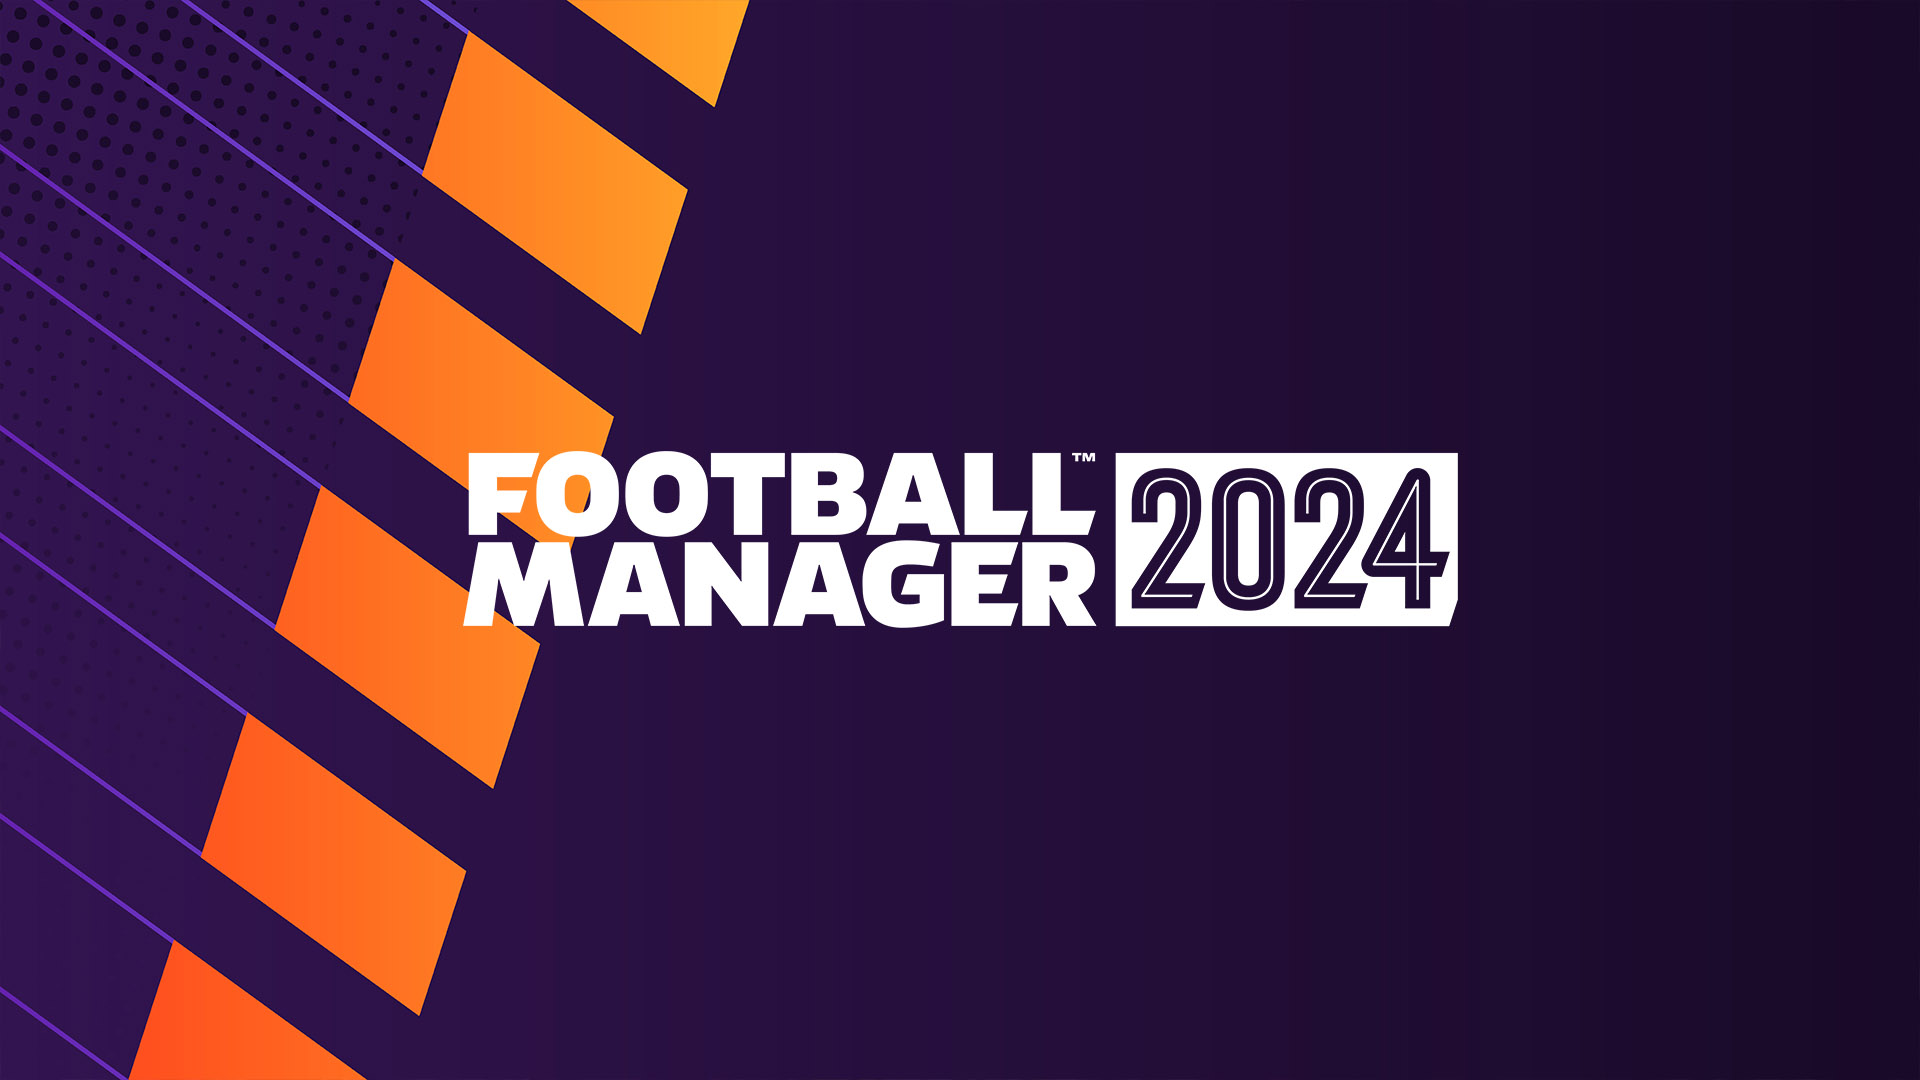 Football Manager 2024 Released The Most Complete Edition In The Series